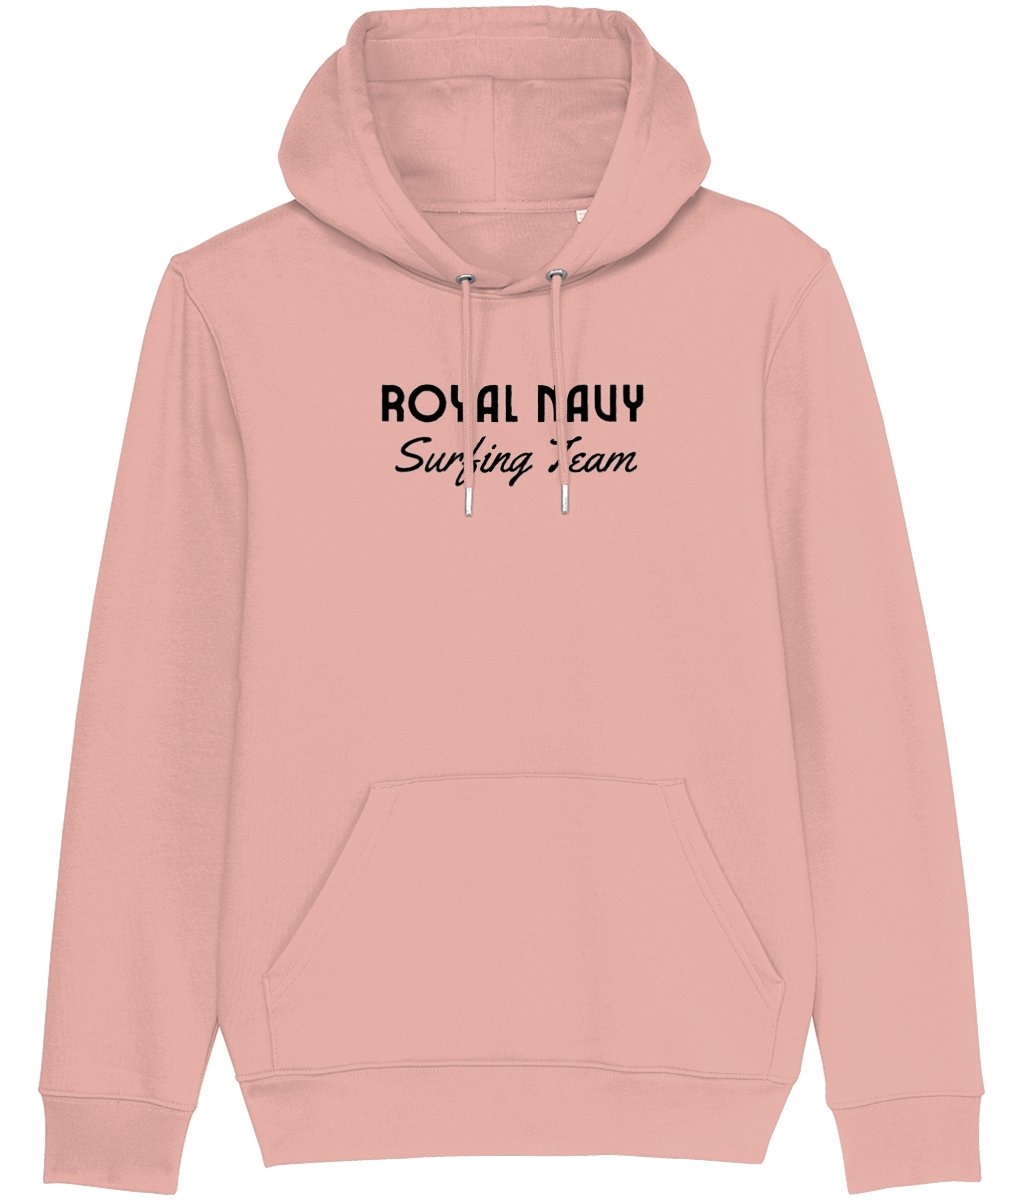 Official Royal Navy Surfing Team Hoodie - The Chits Inn